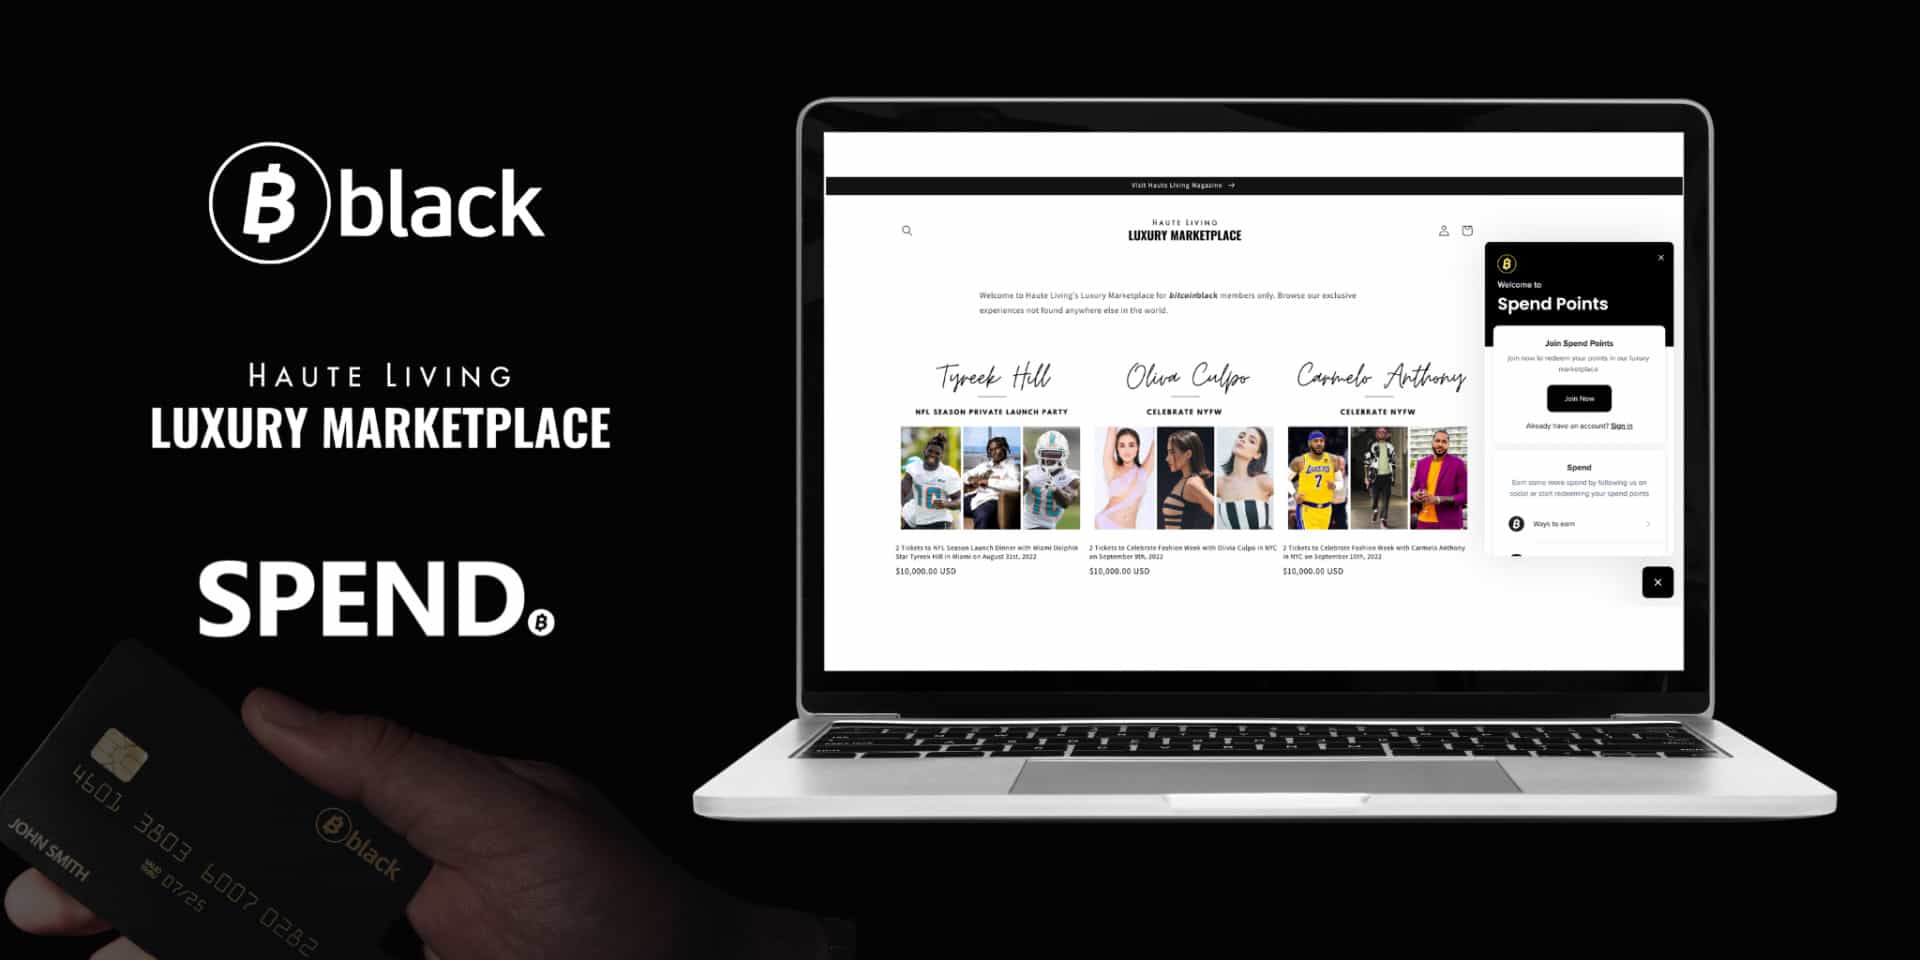 Bitcoinblack-partnered-with-haute-living-magazine-to-launch-exclusive-luxury-marketplace